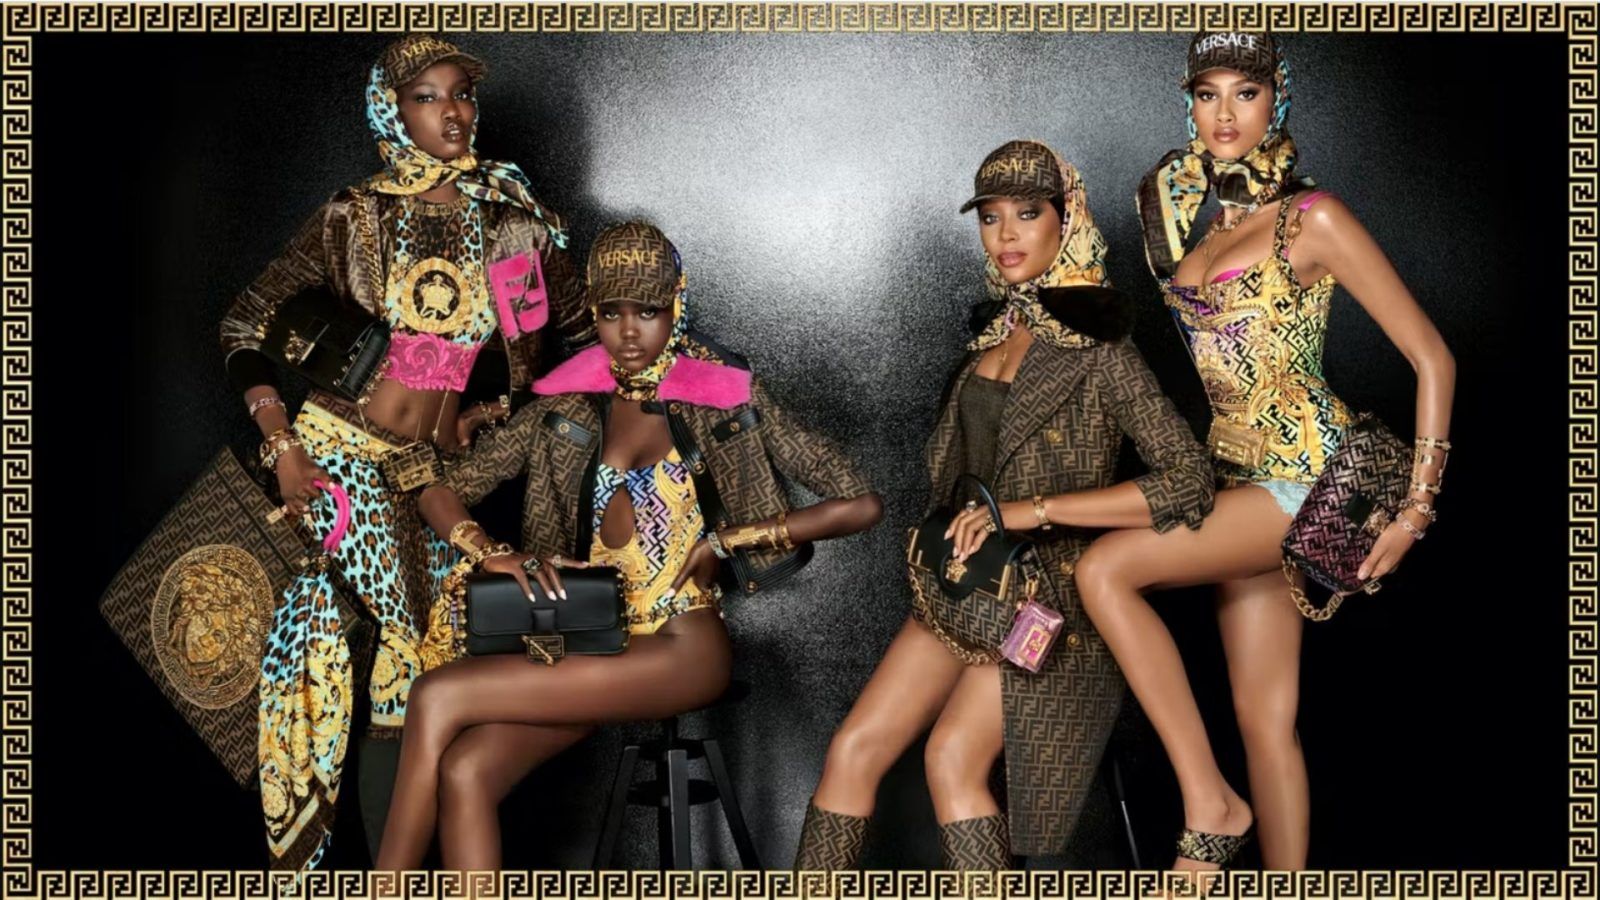 Fendi x Versace ‘Fendace’ collection is set to hit stores on May 12